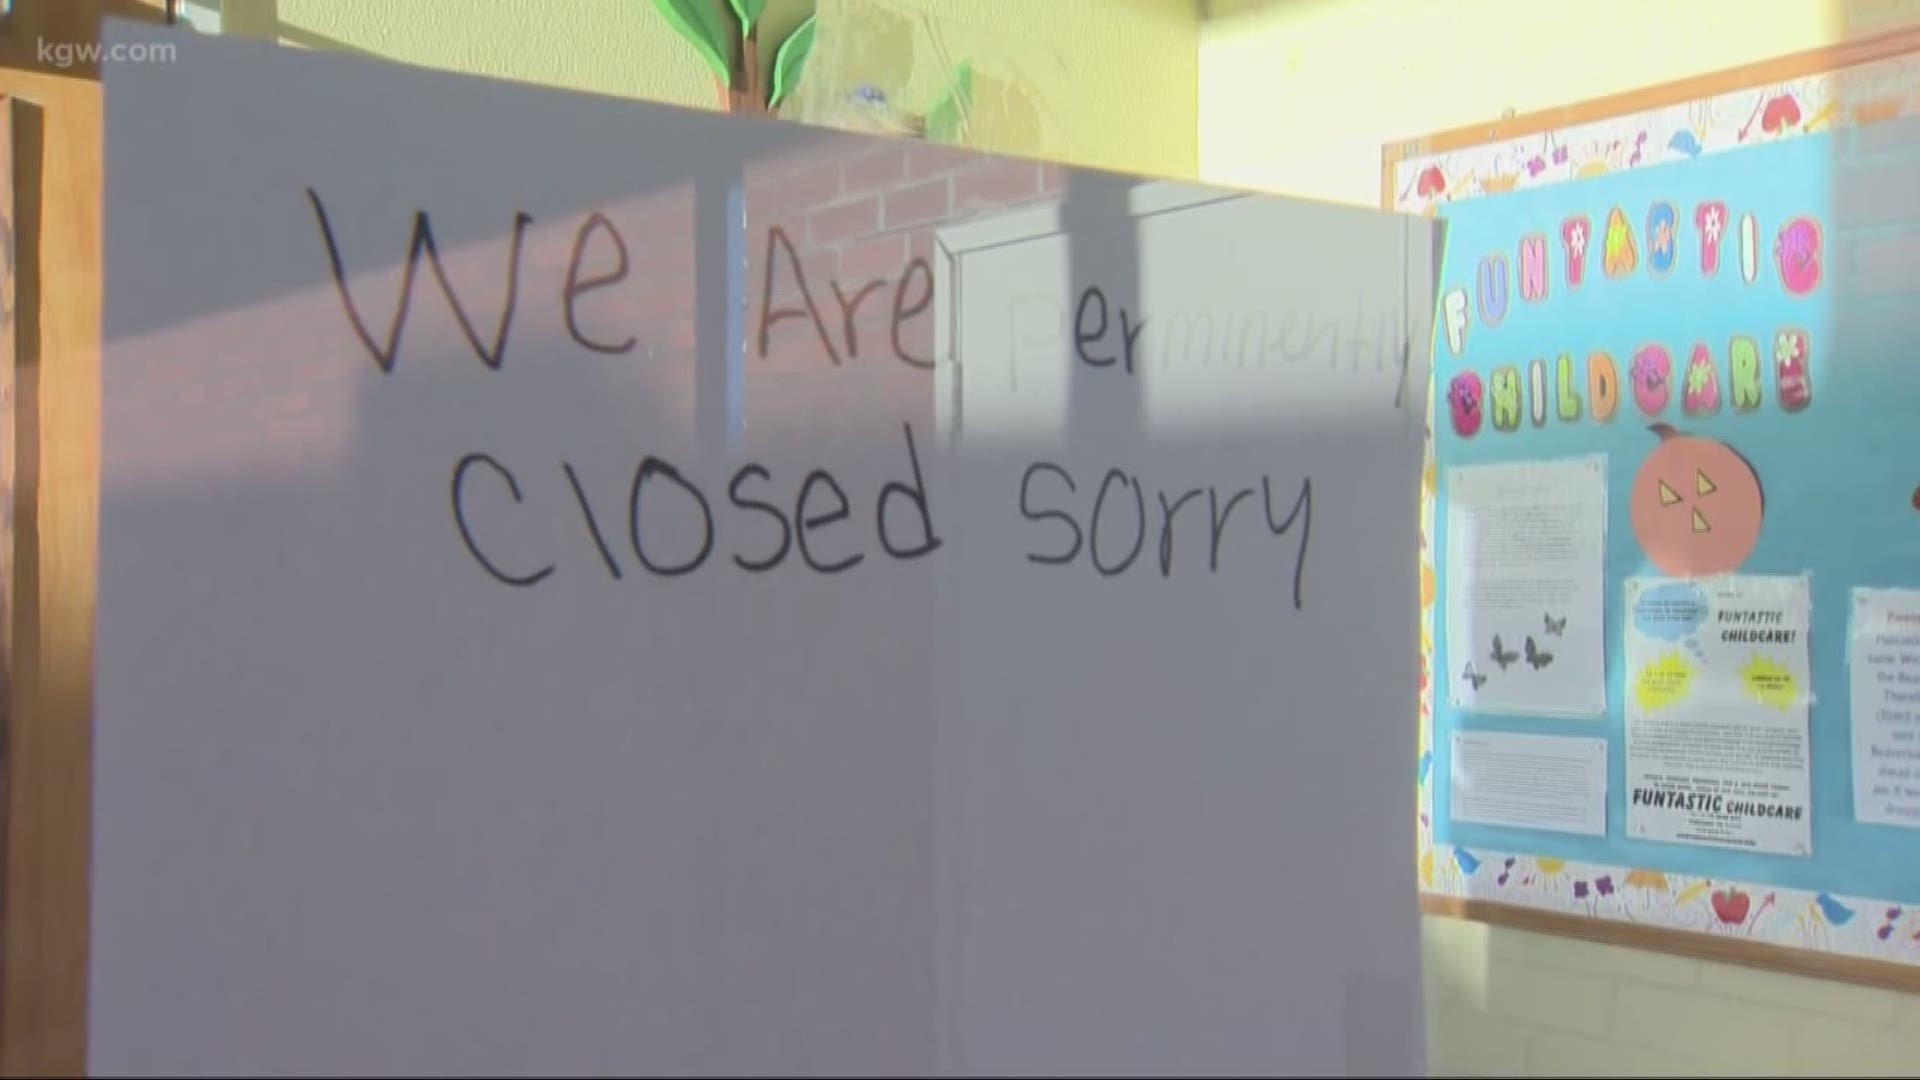 The employees of Funtastic child care found themselves locked out a workplace that has apparently gone out of business.